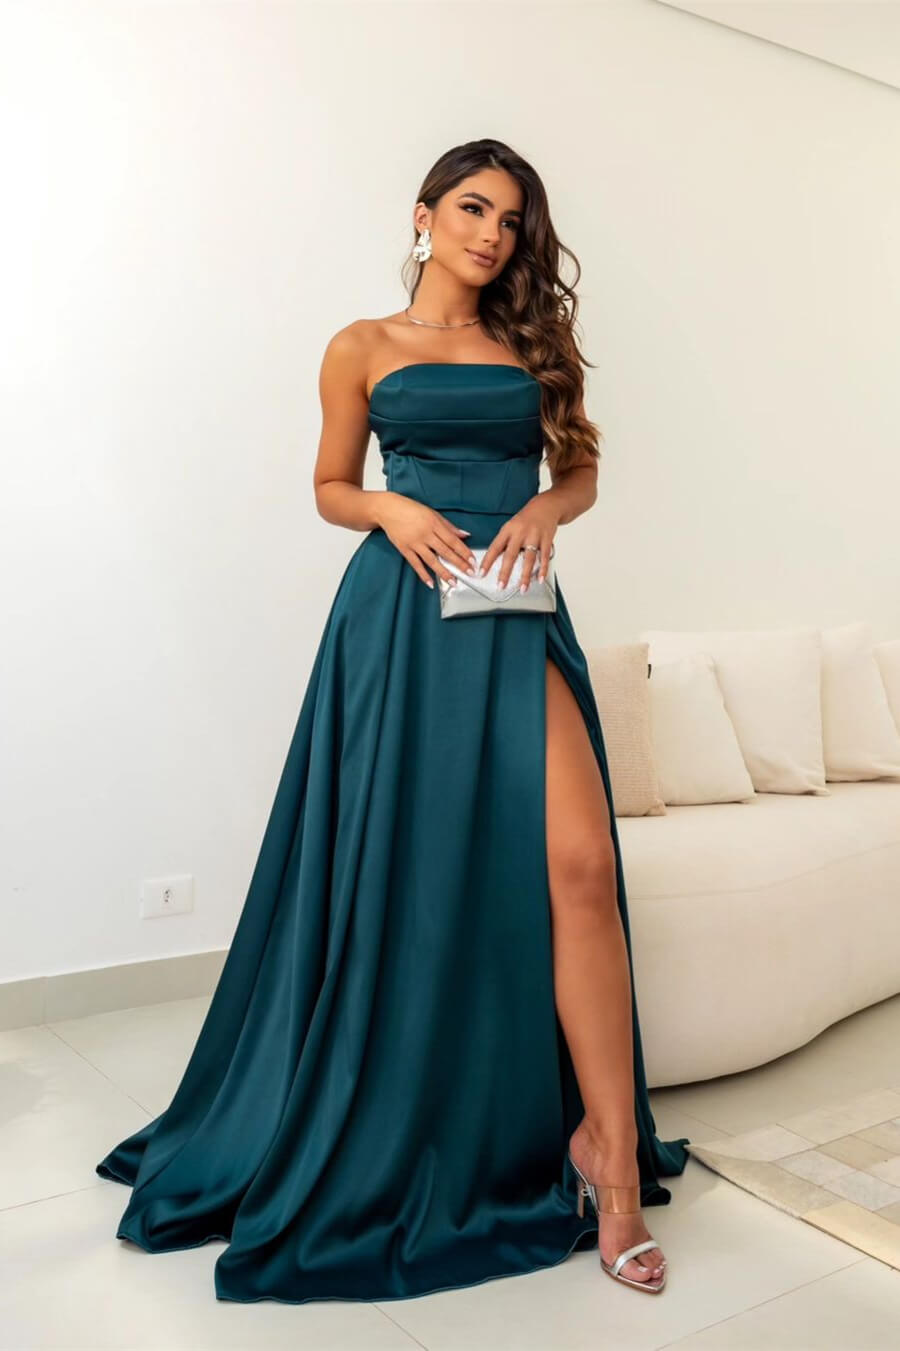 Chic Strapless Sleeveless Mermaid Evening Gown With Split On Sale - lulusllly